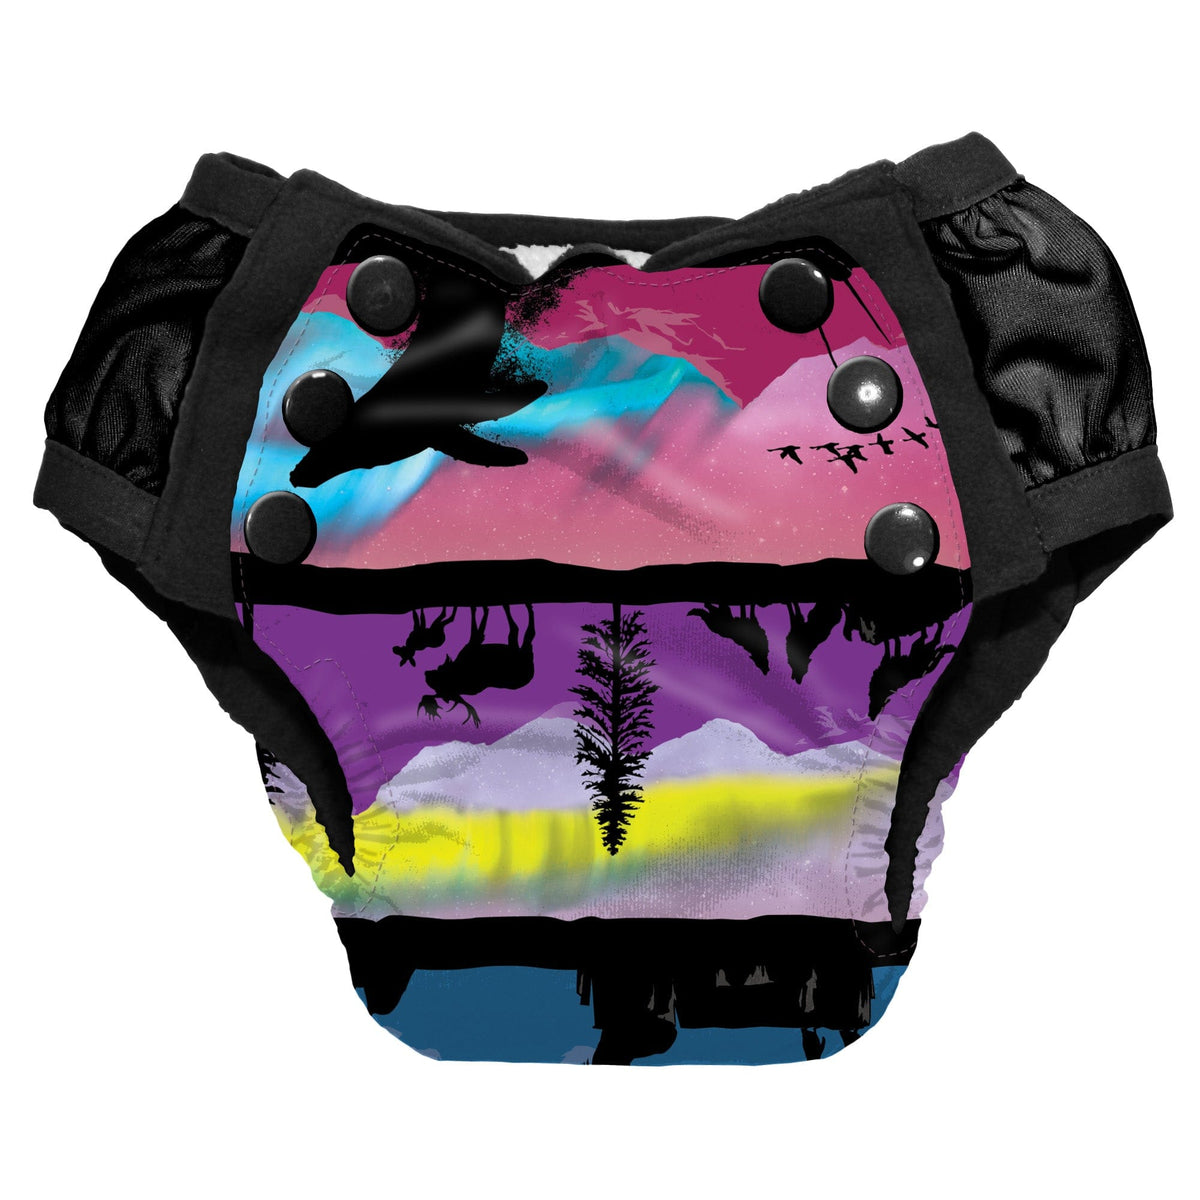 Snazzipants NightTime Training Briefs Reusable Alternative to Disposable  PullUps